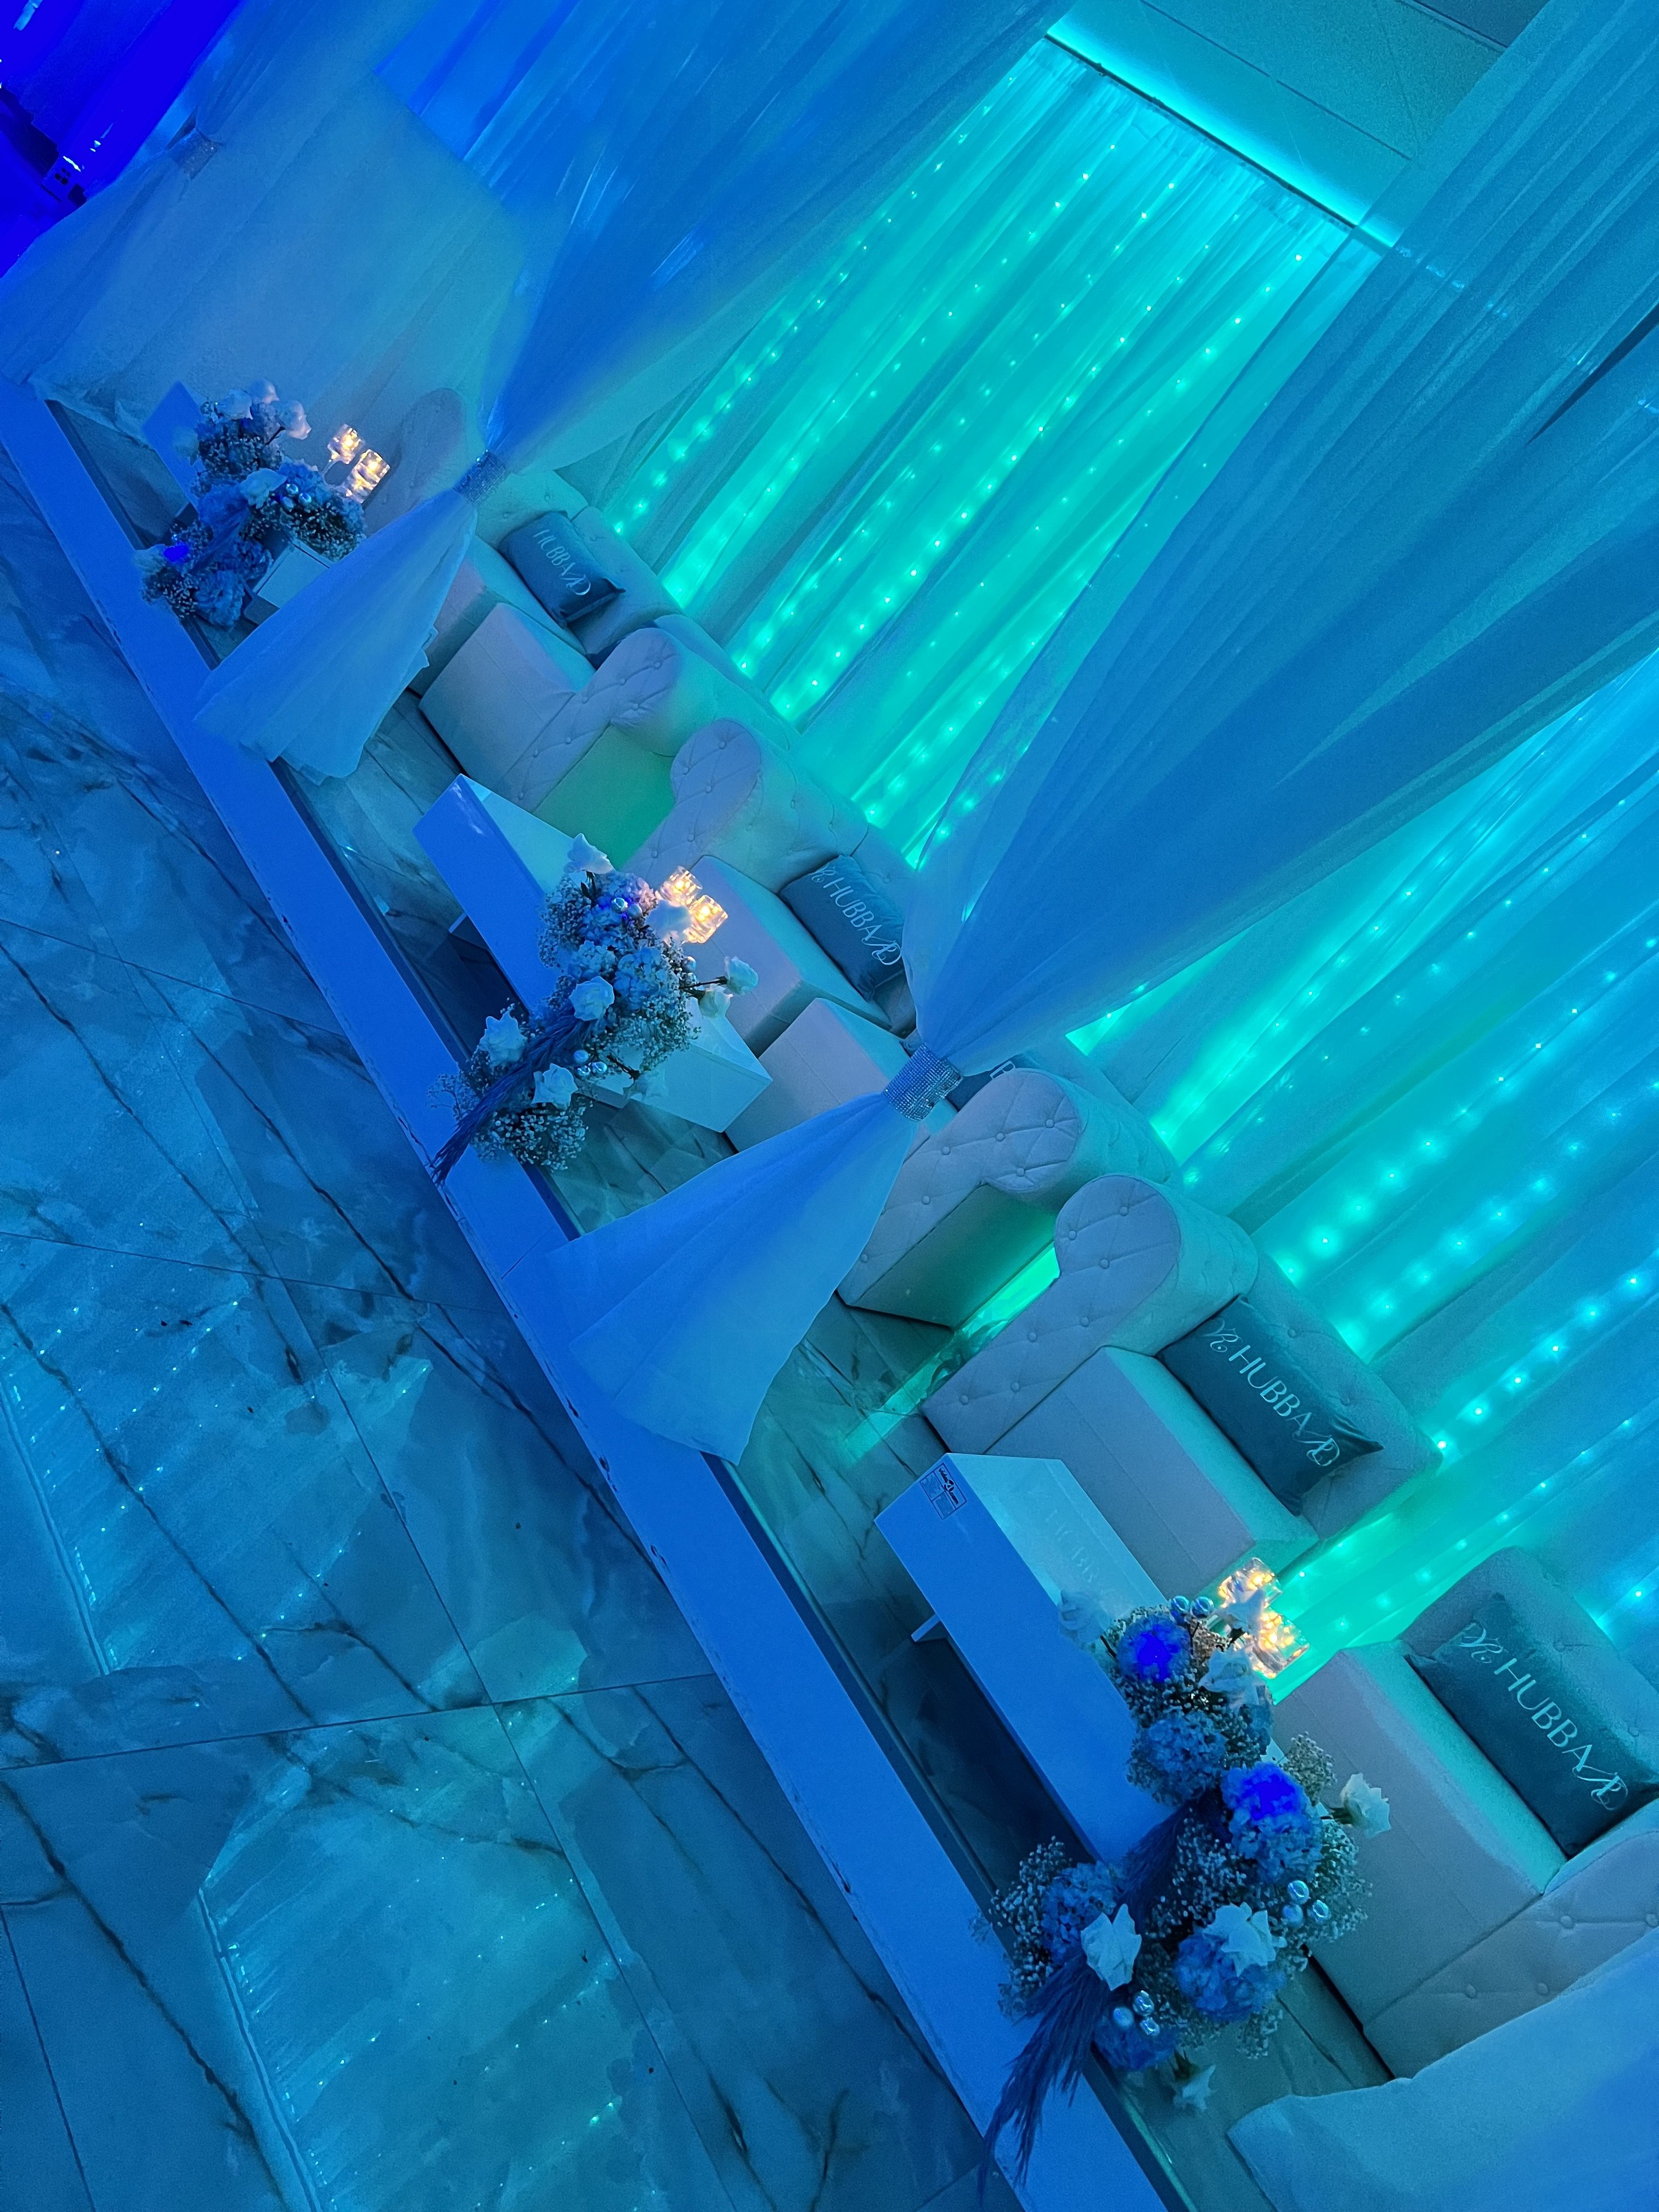 A modern event space with sleek white sofas adorned with blue and white floral arrangements, set against a wall illuminated by vertical blue neon lights.